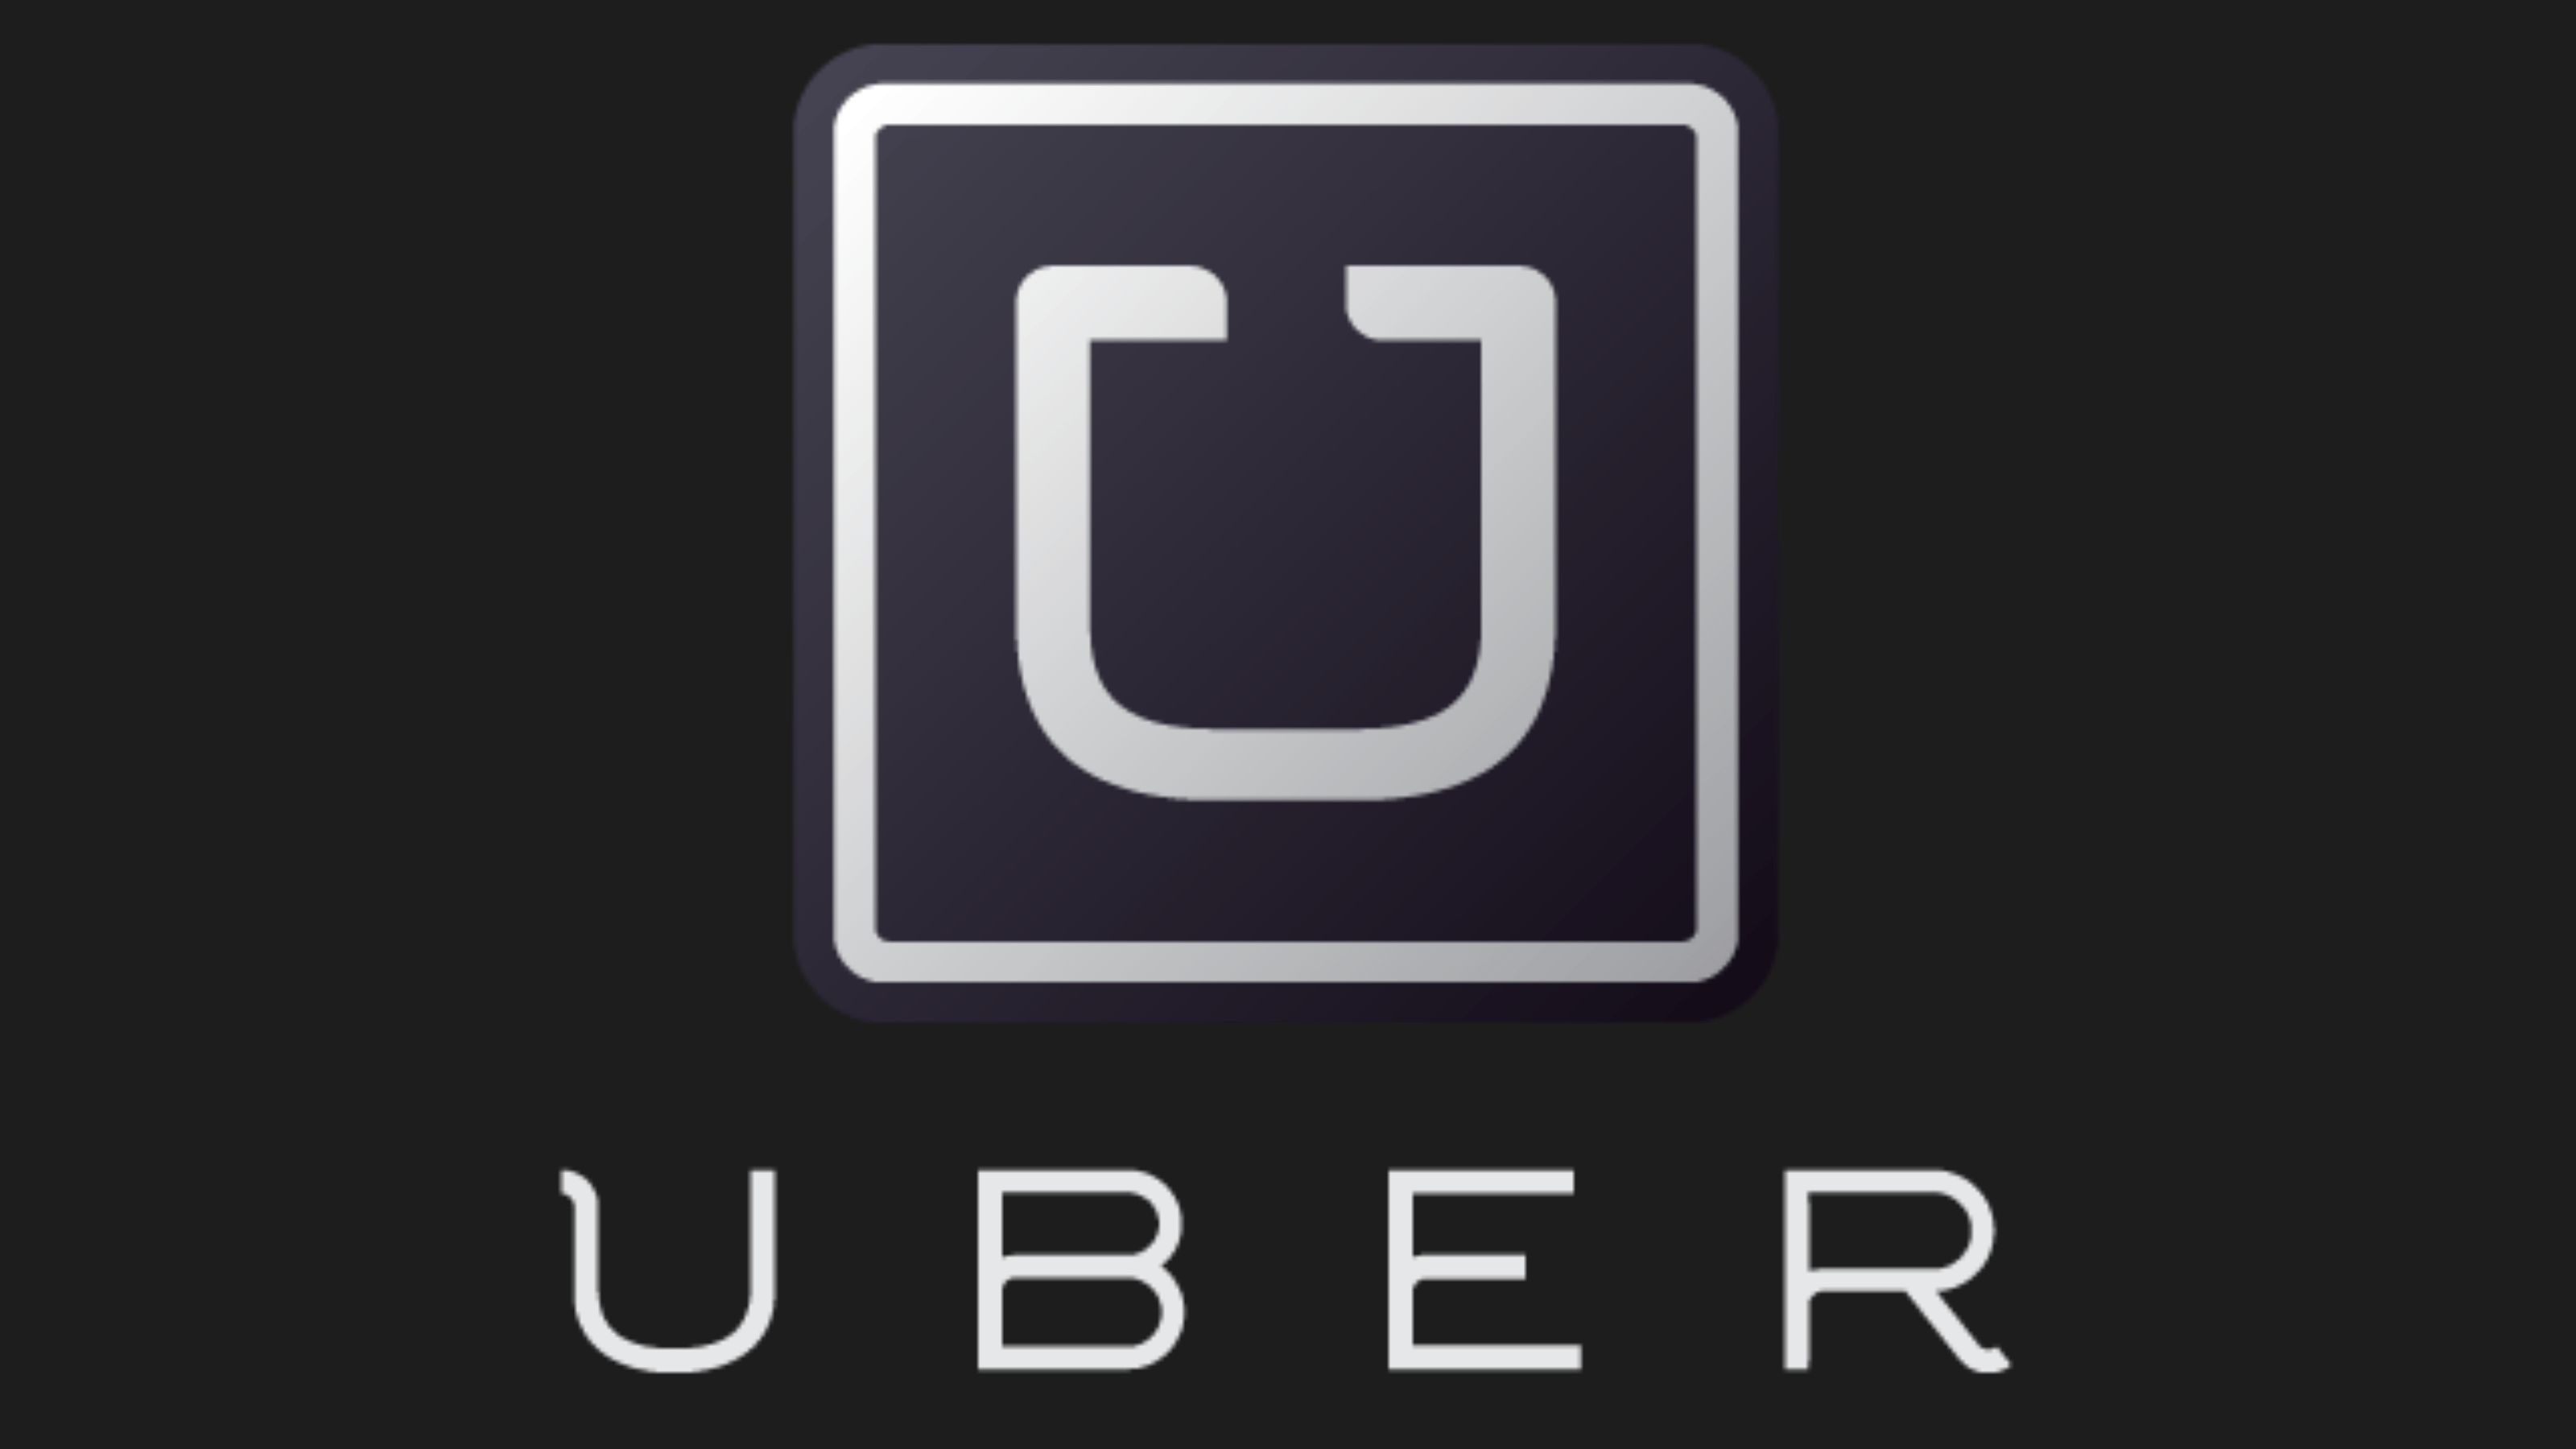 Uber offers war veterans and their spouses the chance to drive for uberX commission free for three months